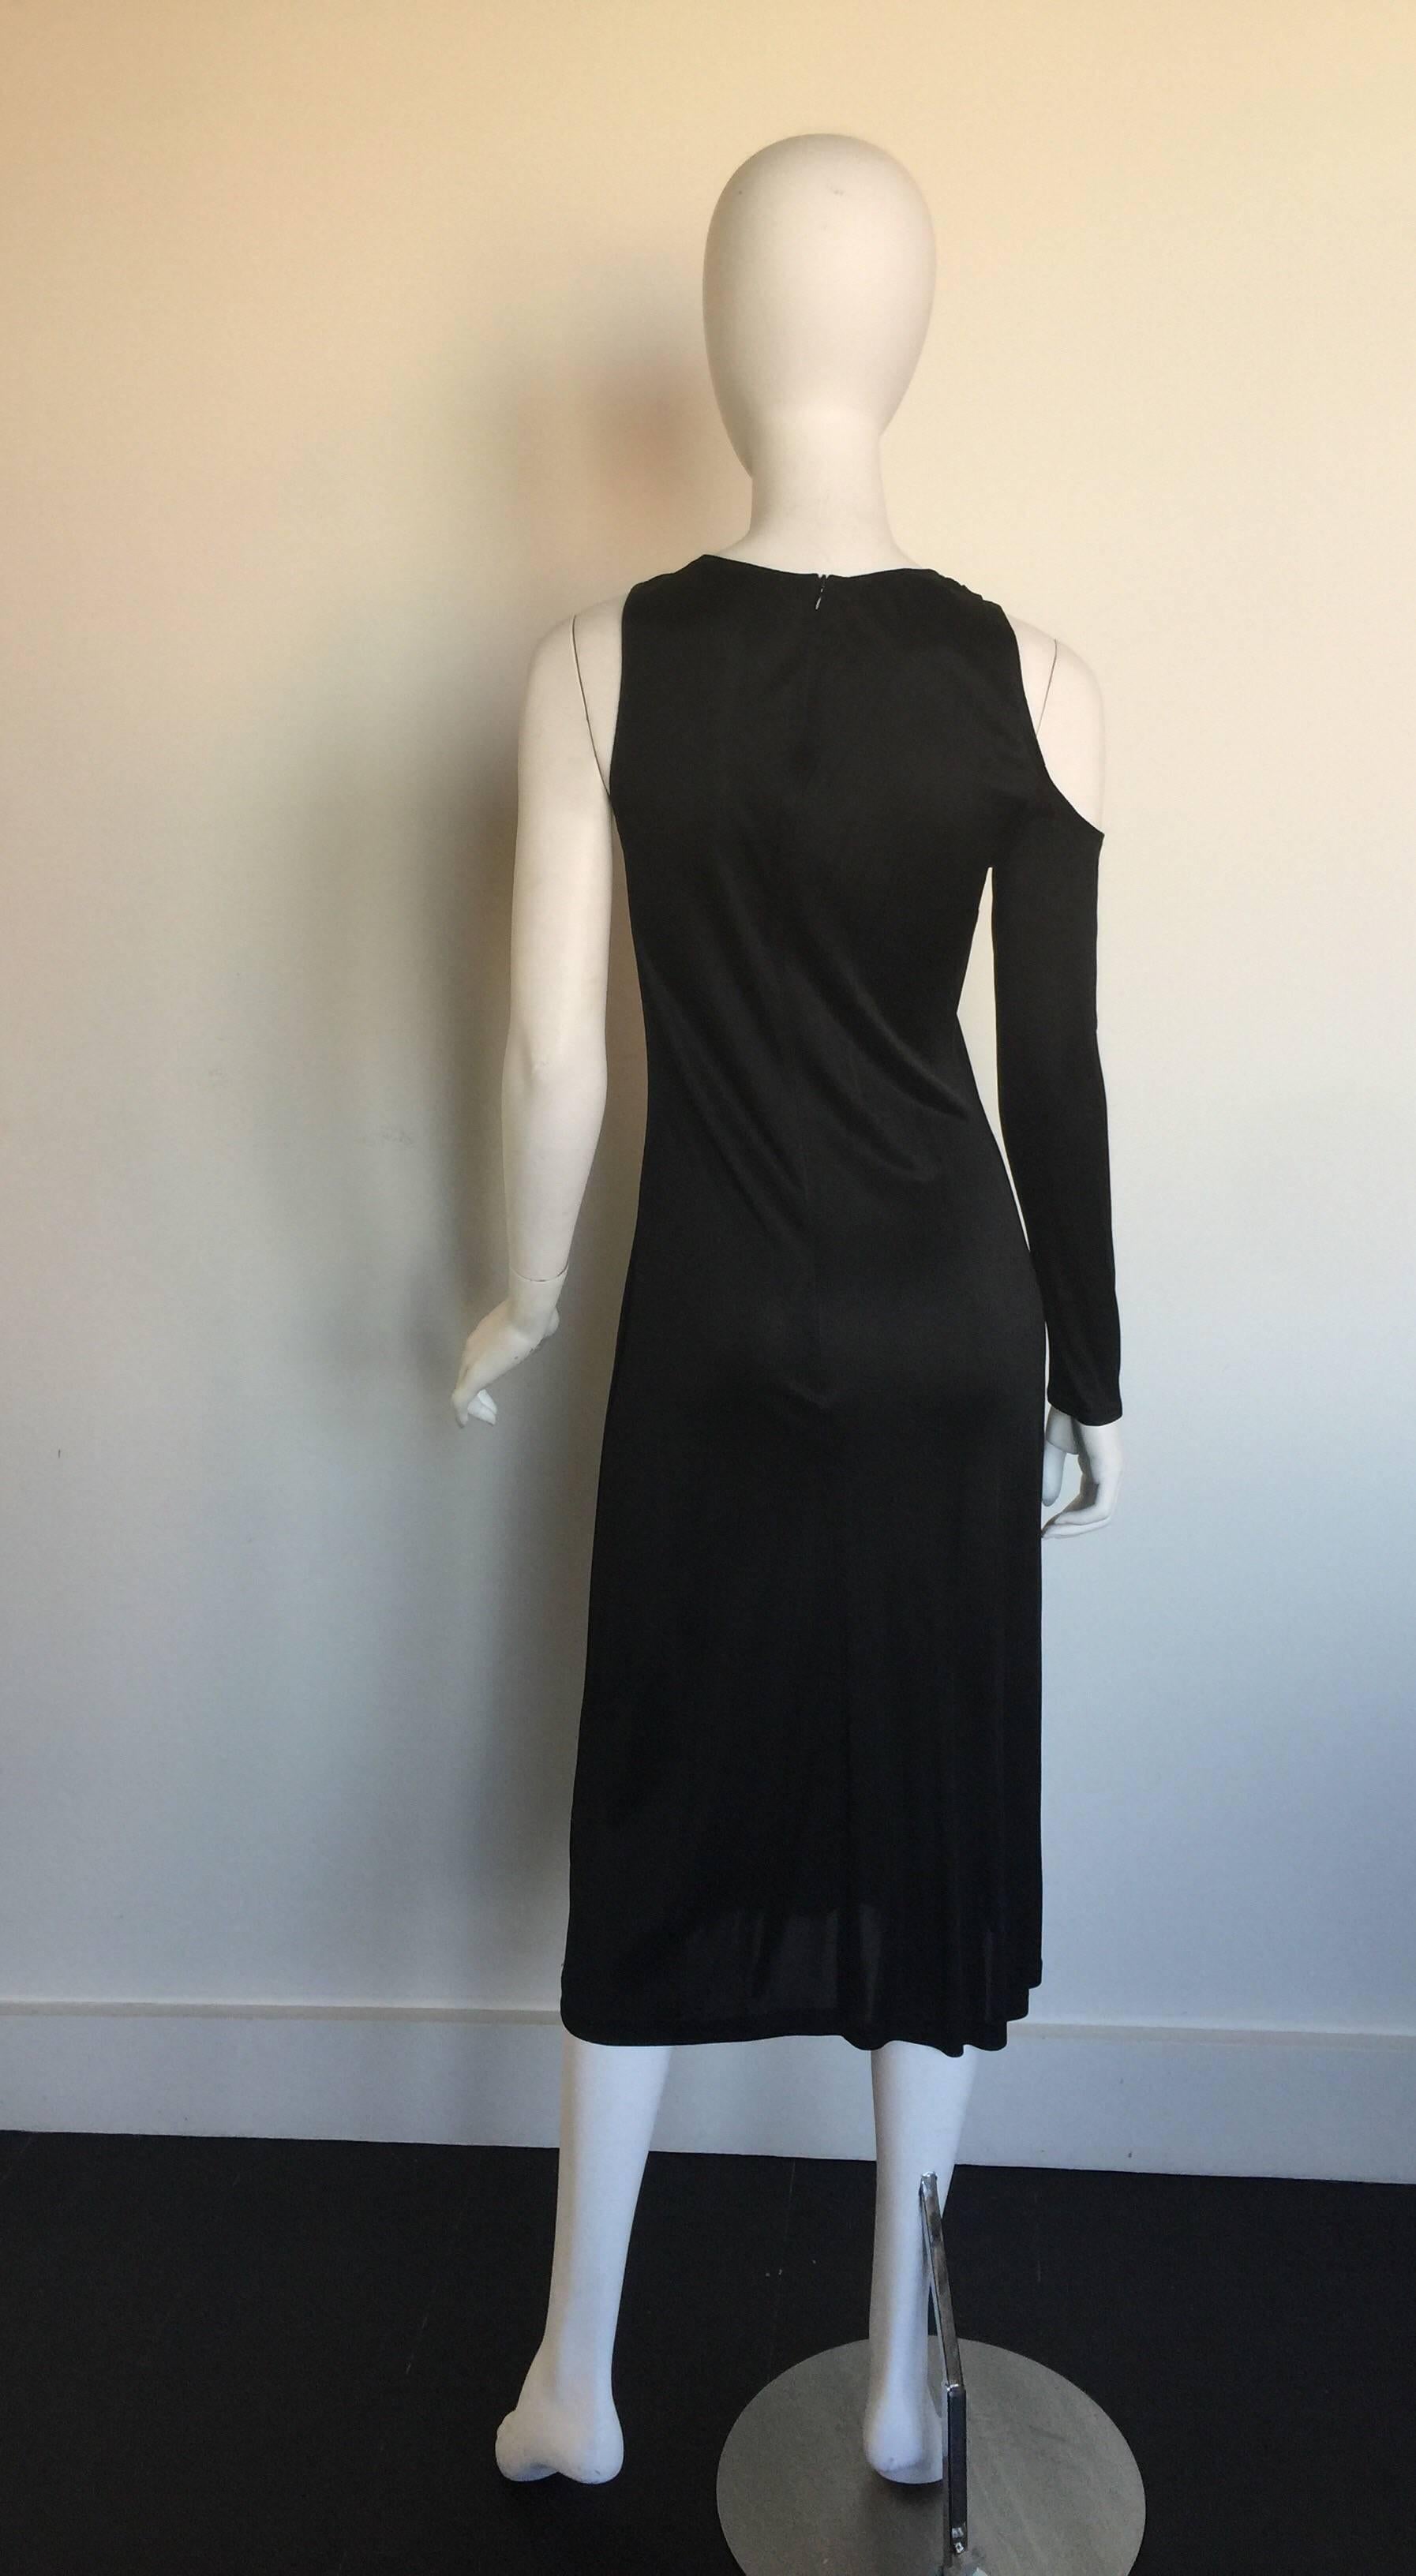 Versus Versace One Sleeve Dress In Good Condition For Sale In New York, NY